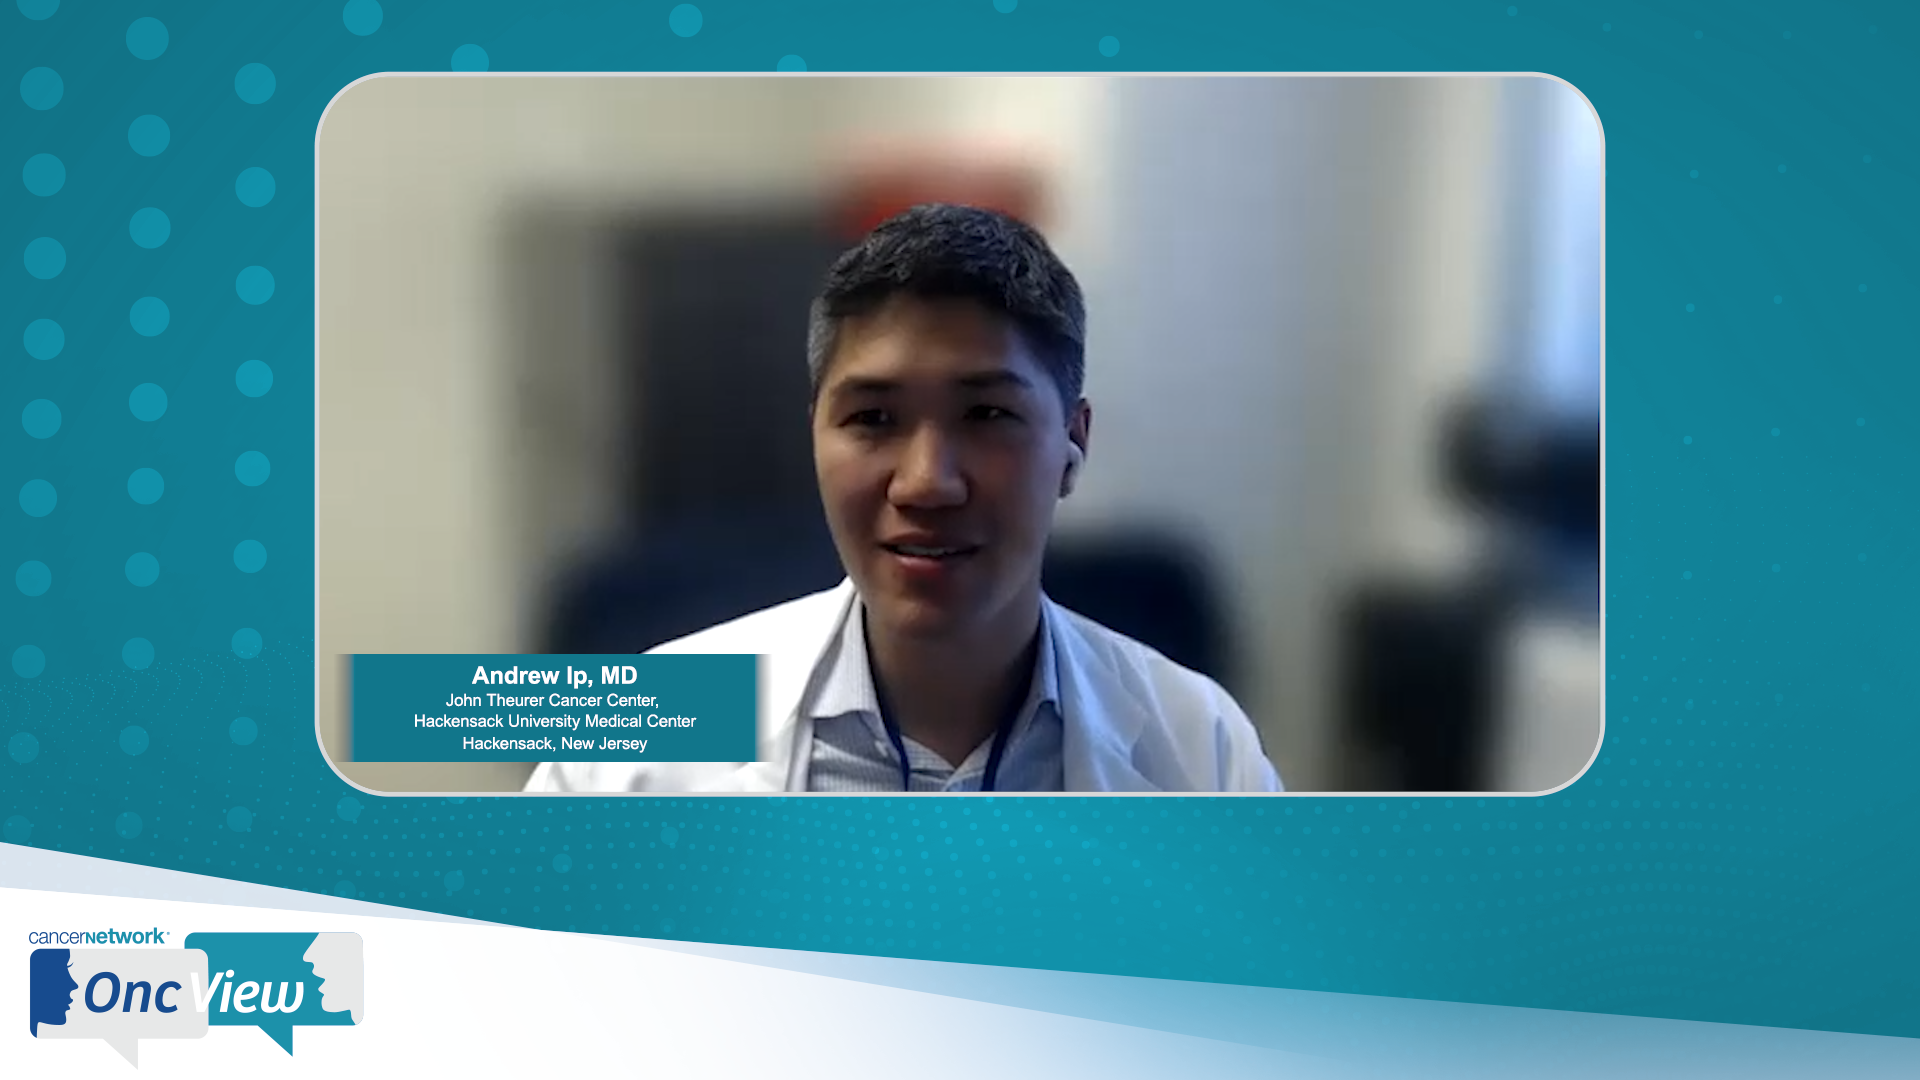 Andrew Ip, MD, an expert on B-cell malignancies